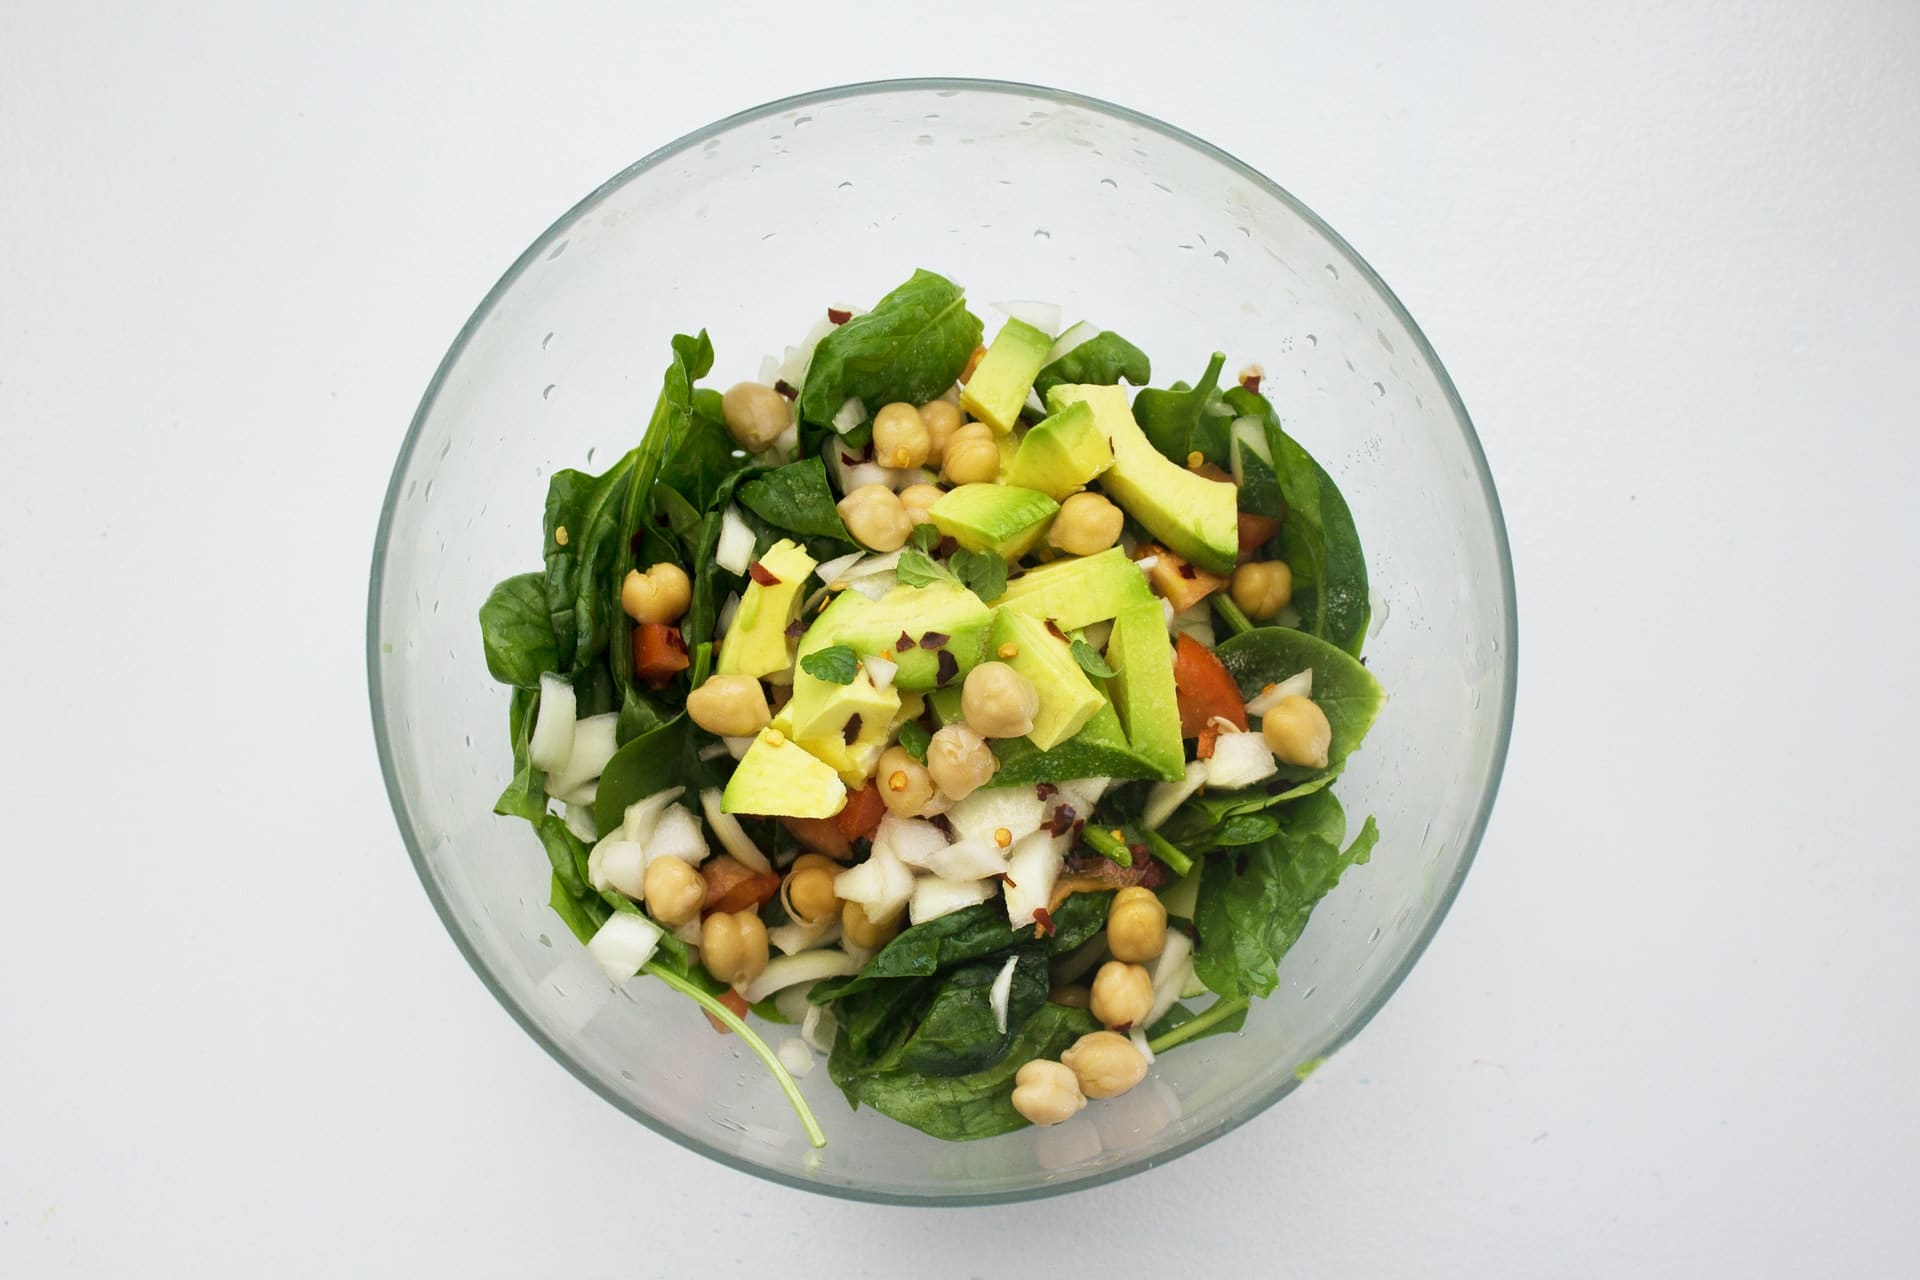 Mixed green salad with chickpeas, avocado, onions, and more